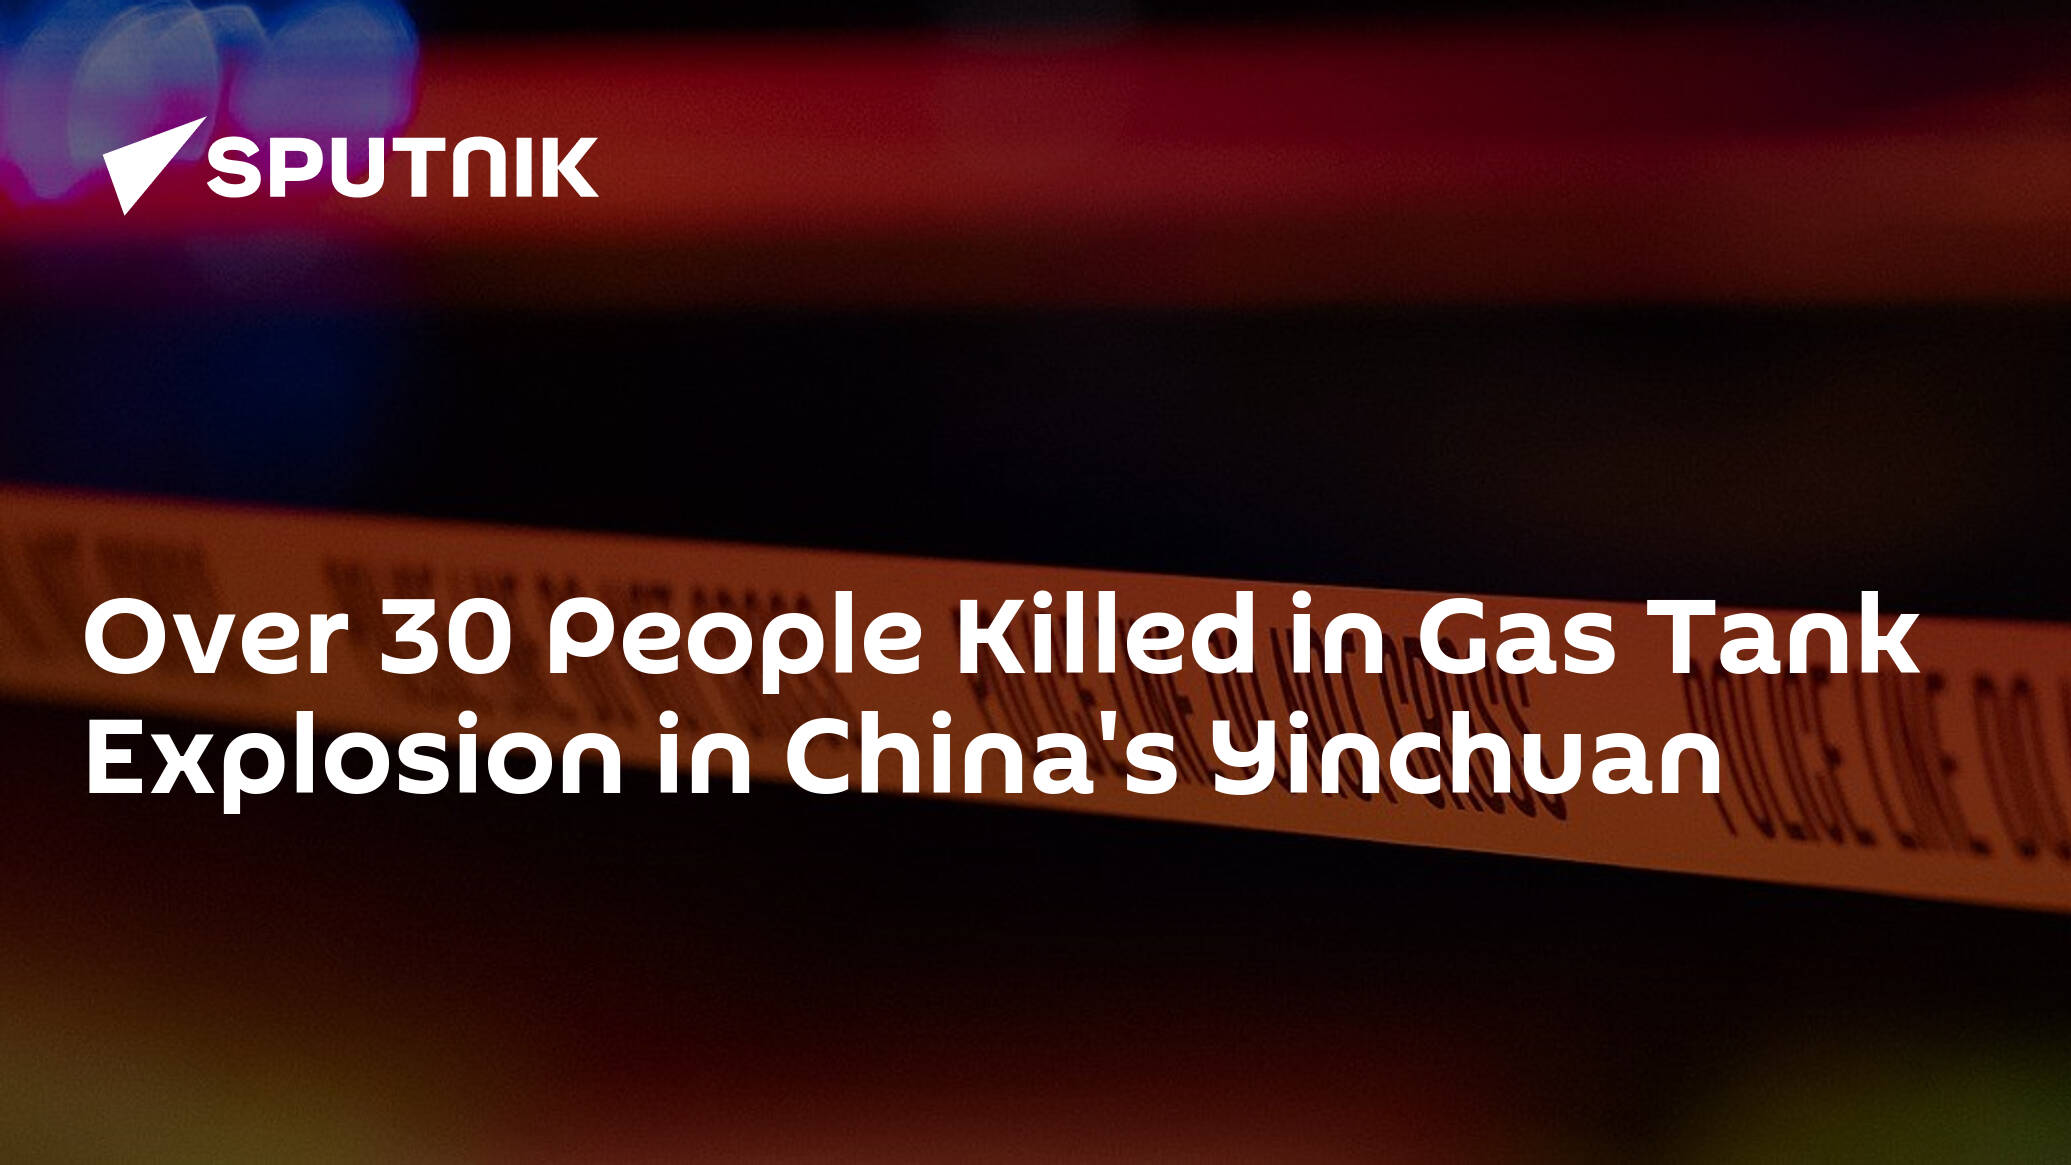 Over 30 People Killed in Gas Tank Explosion in China's Yinchuan